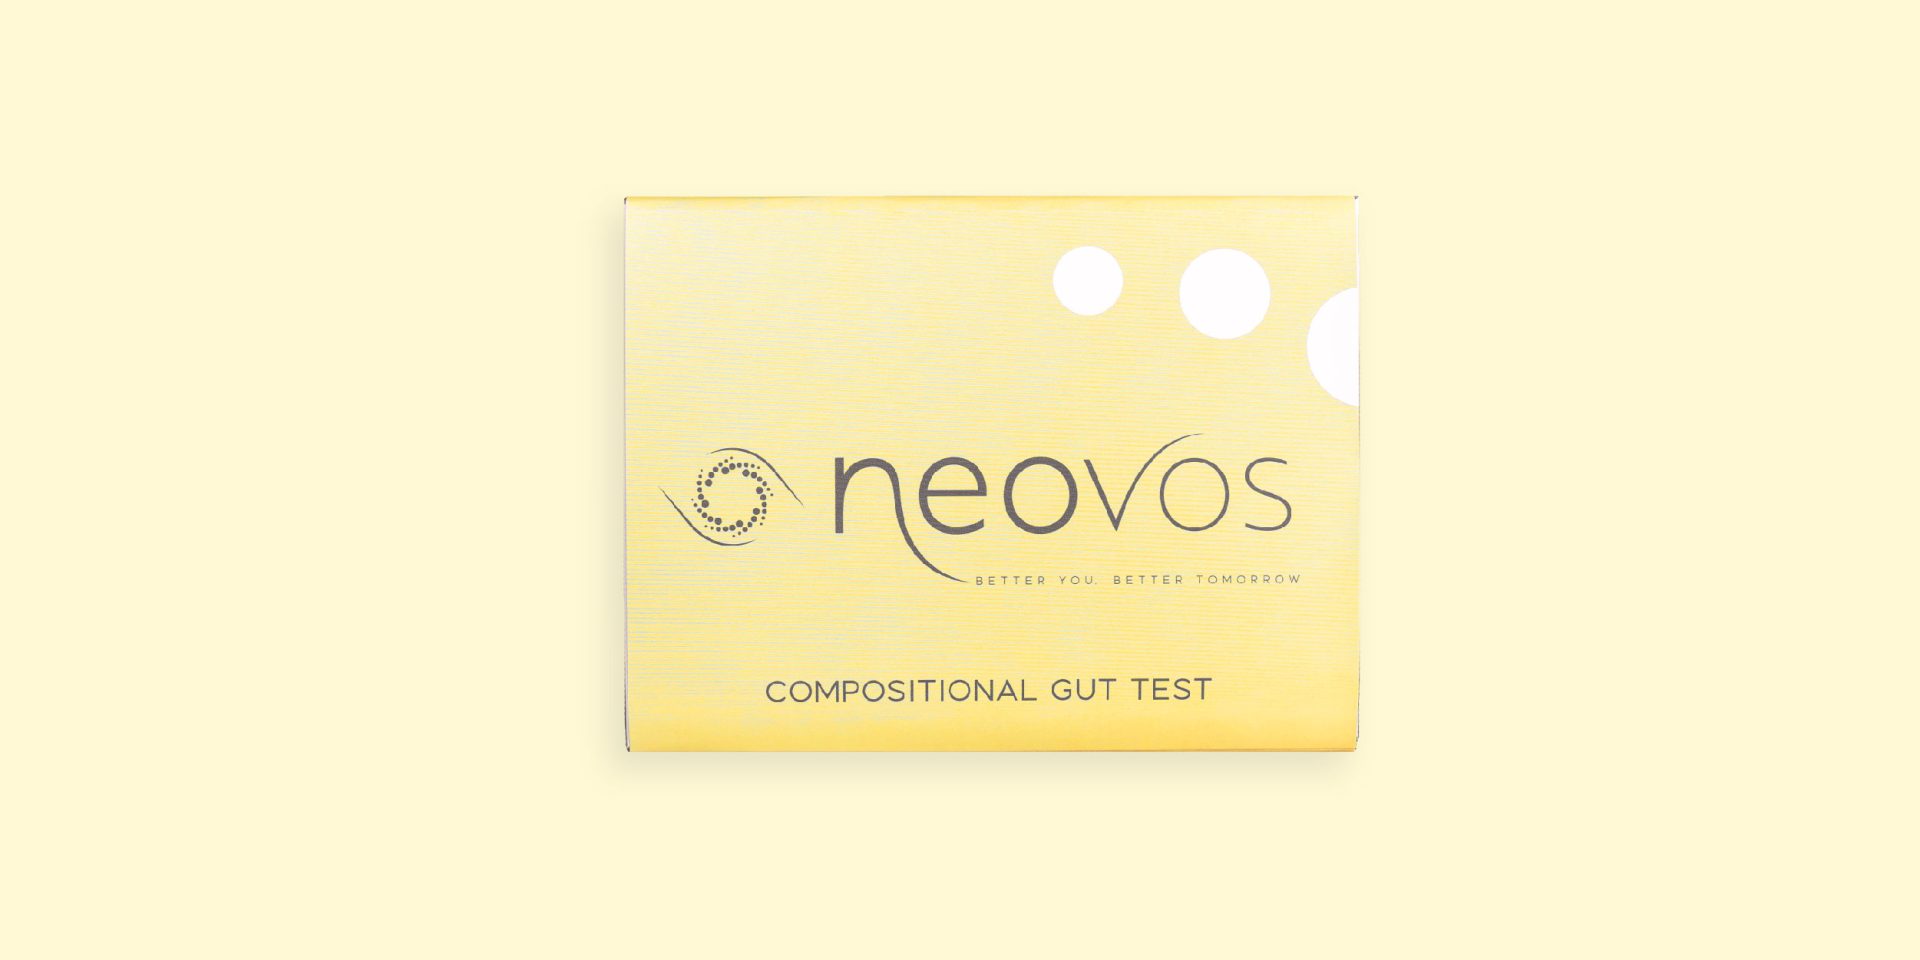 Introducing Our Compositional Gut Test